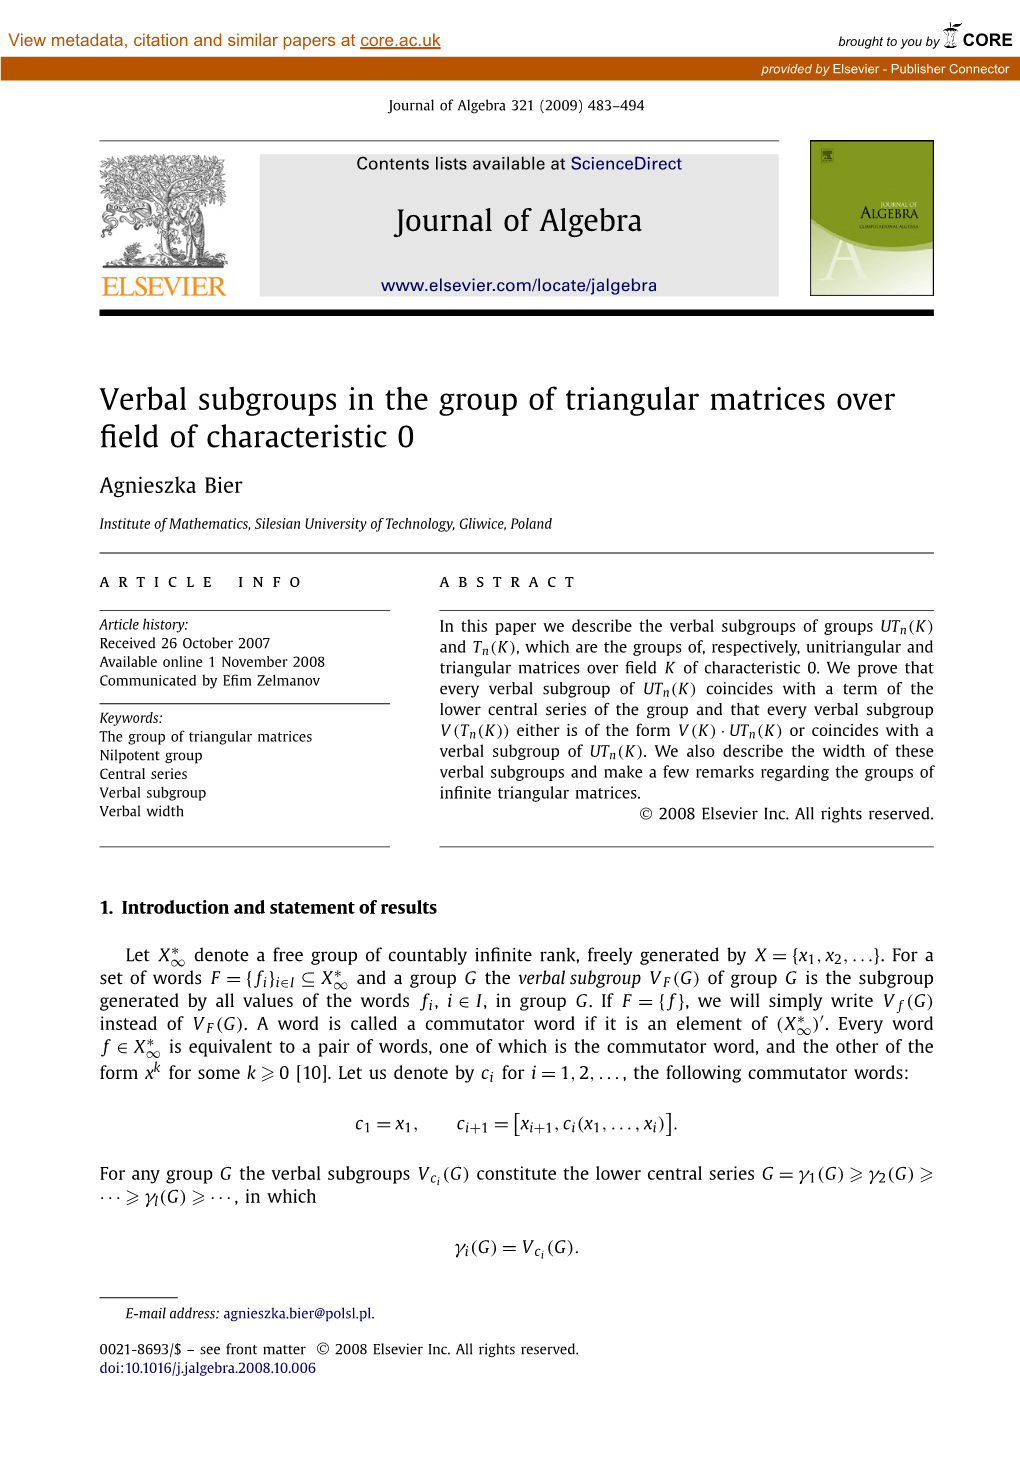 Verbal Subgroups in the Group of Triangular Matrices Over ﬁeld of Characteristic 0